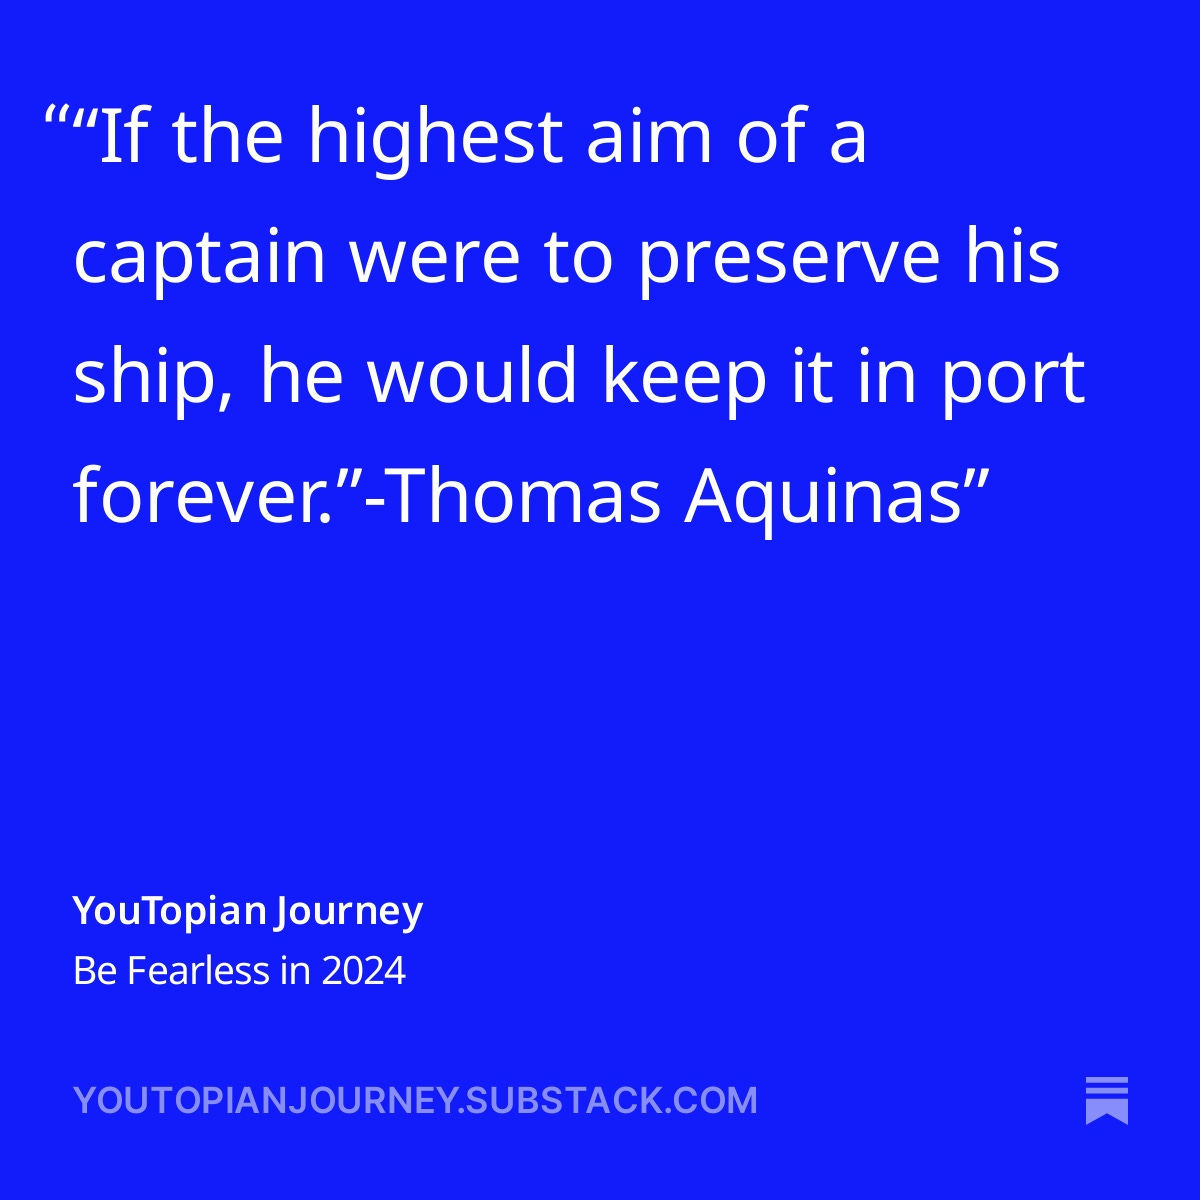 Thomas Aquinas Quote "If the highest aim of a captain were to preserve his ship, he would keep it in port forever."